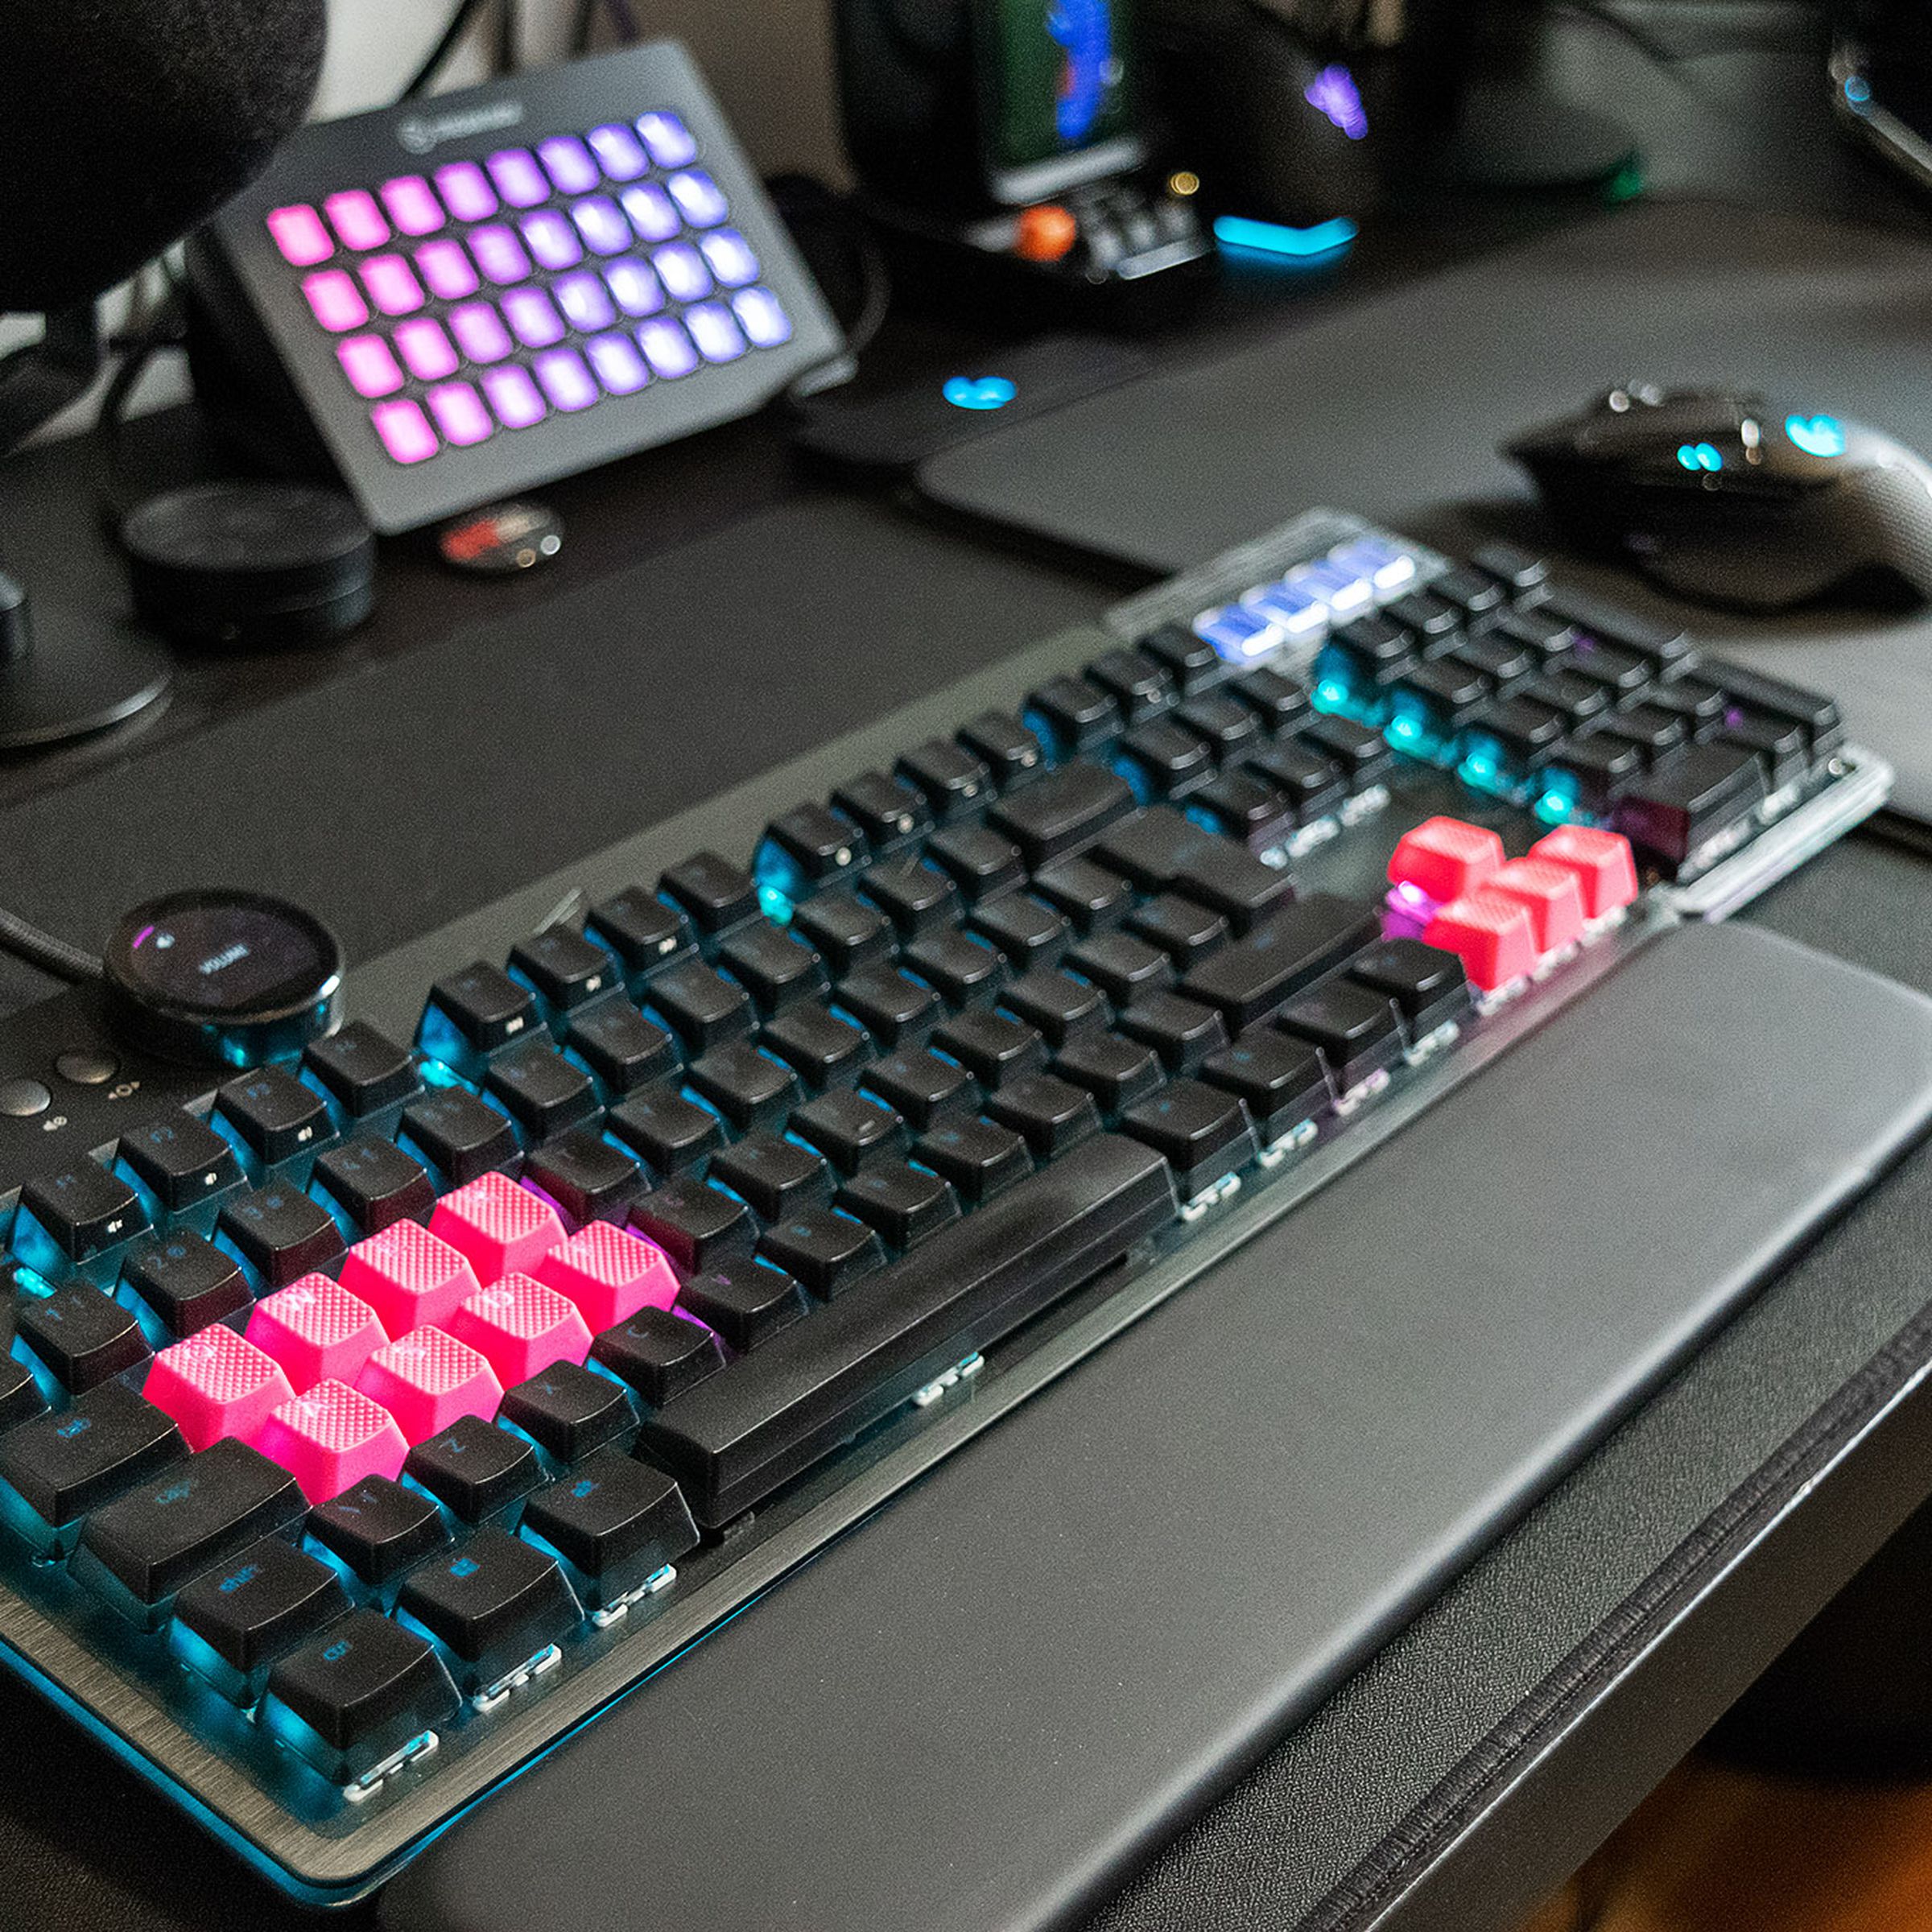 The modular Everest Max is one of the best keyboards I’ve tested